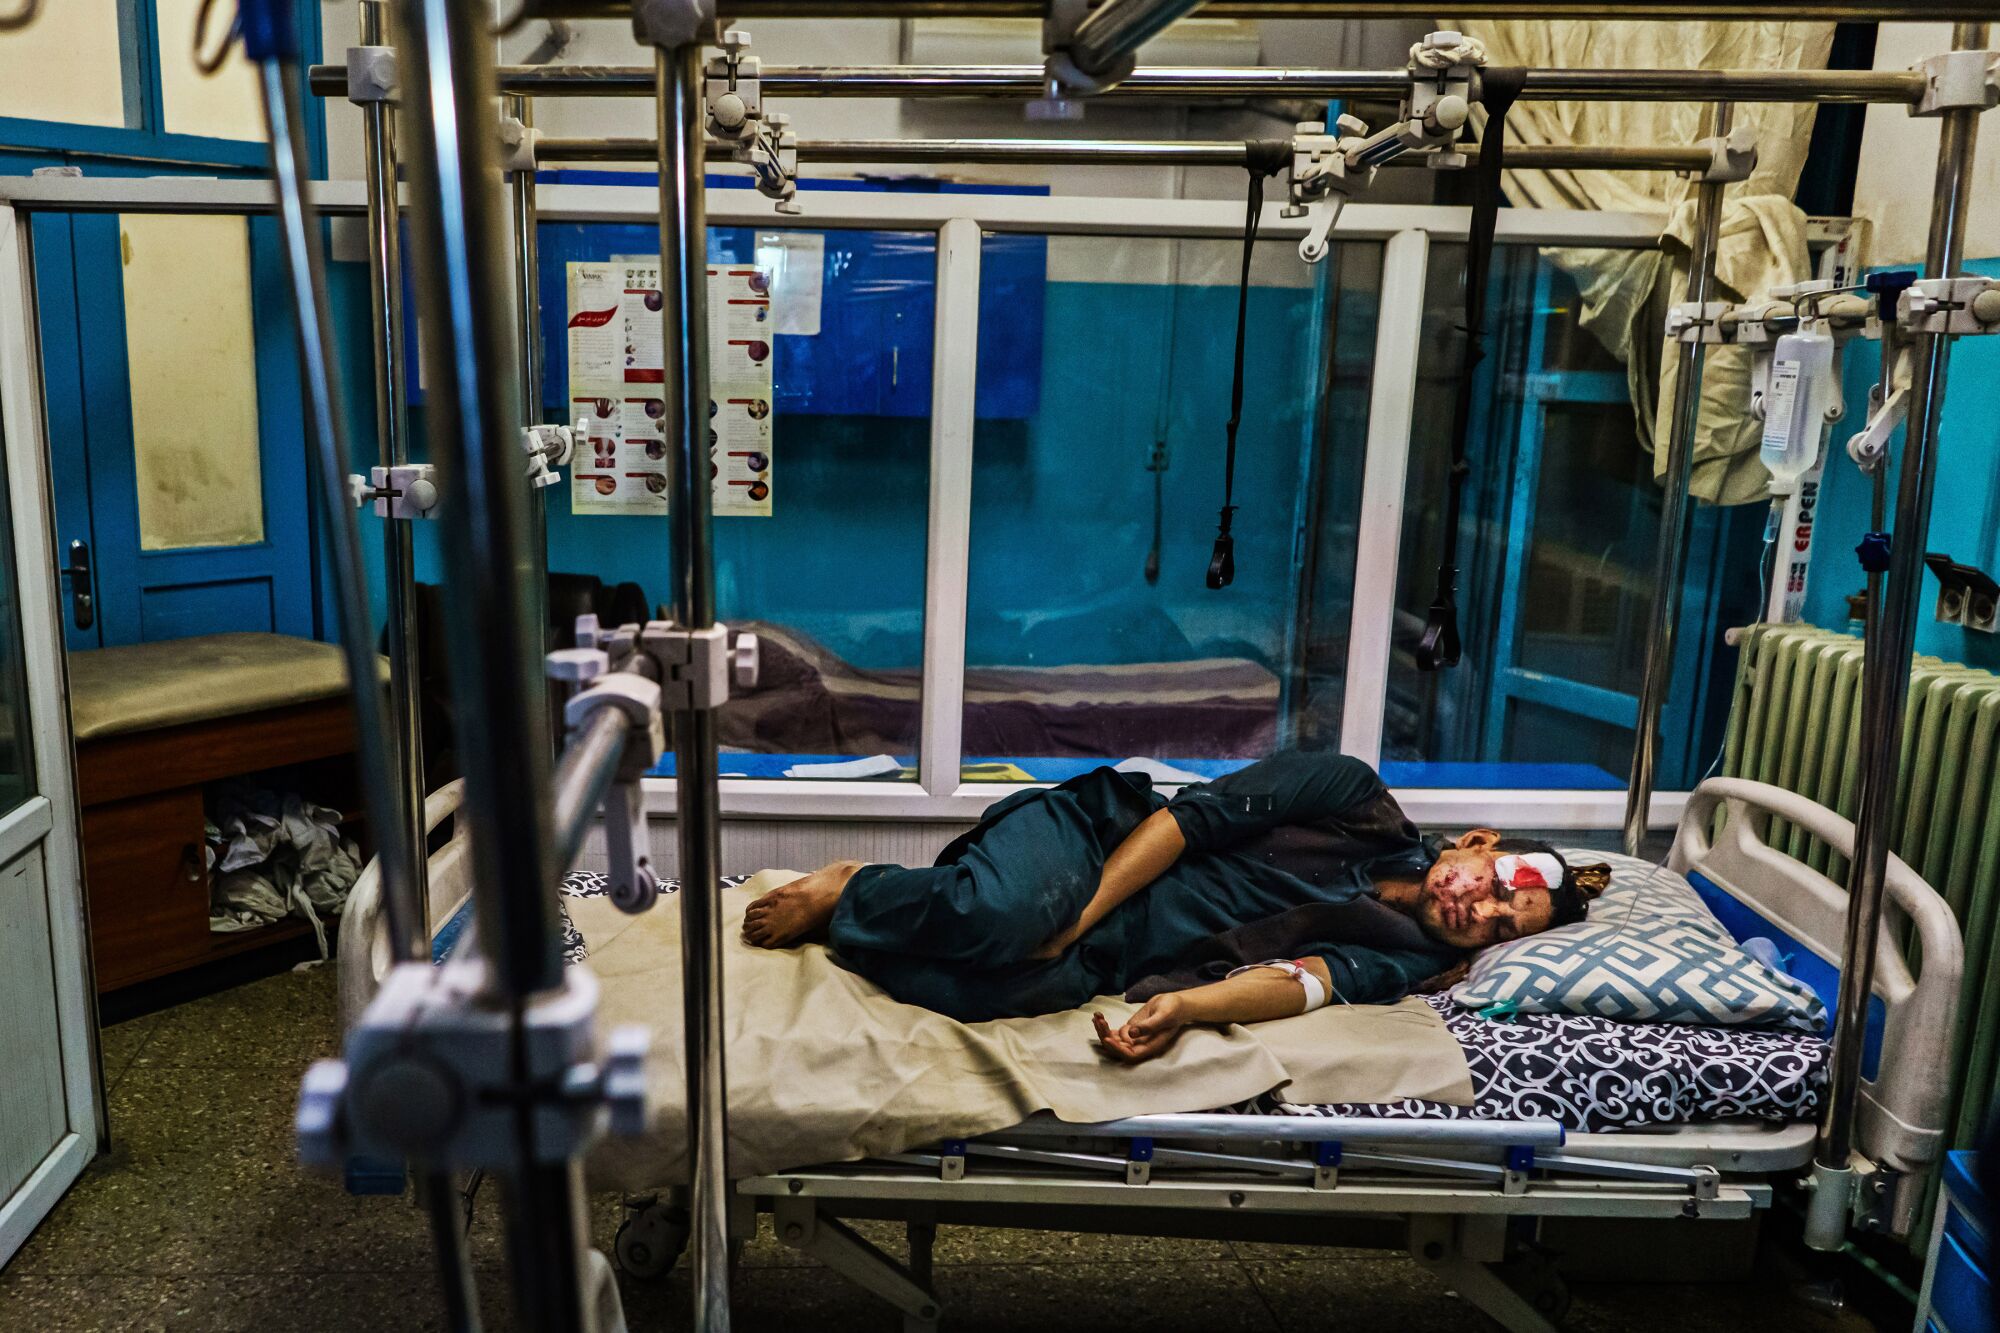 A wounded patient sleeps on a hospital bed after a suicide bomber struck the Kabul airport.